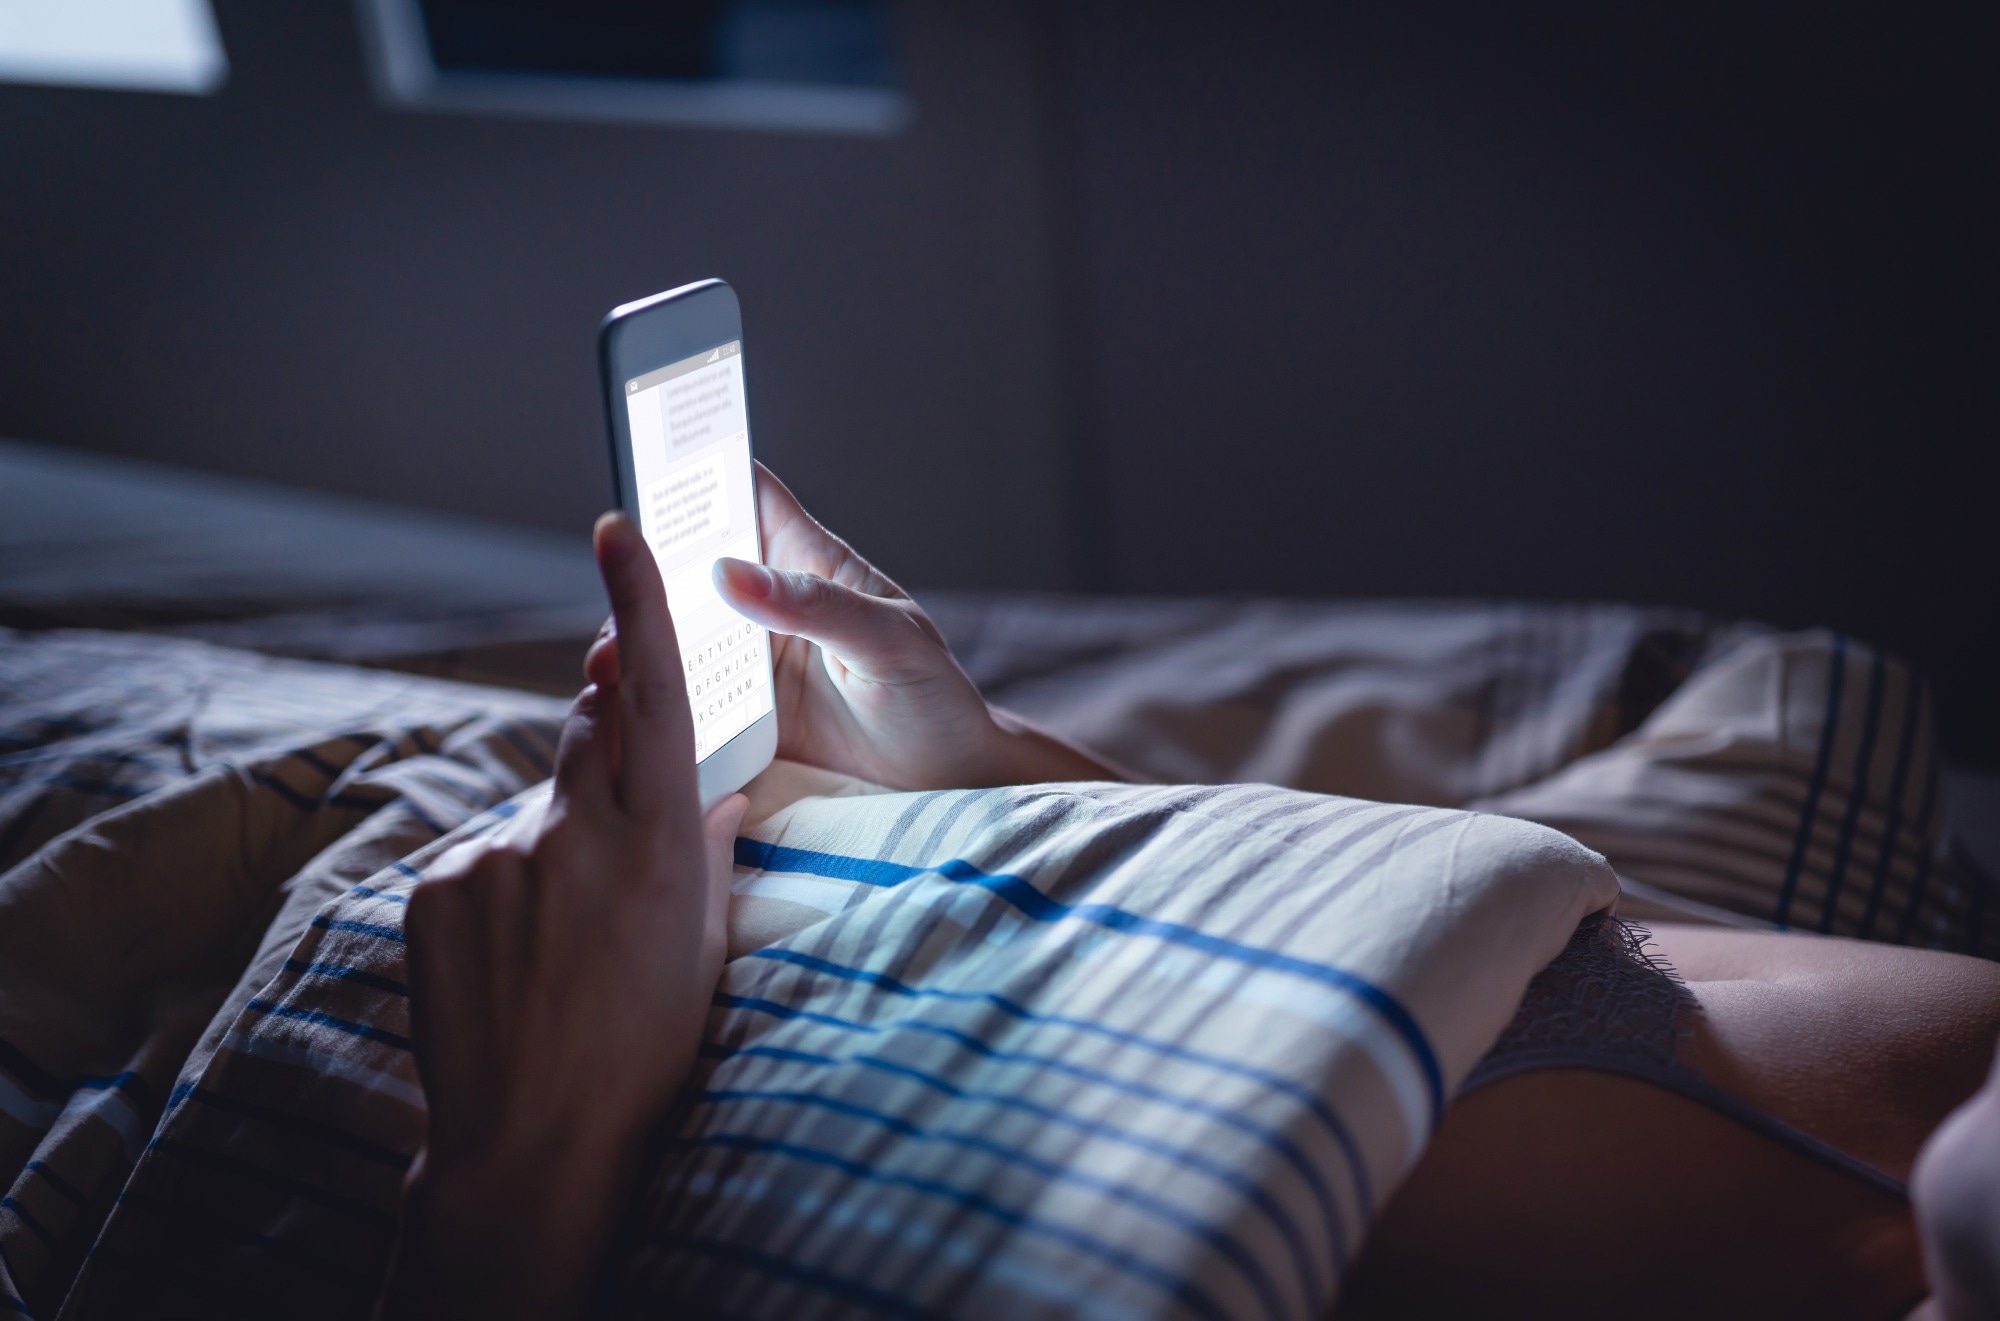 Study: Problematic technology use and sleep quality in young adulthood: novel insights from a nationally representative twin study. Image Credit: TeroVesalainen/Shutterstock.com